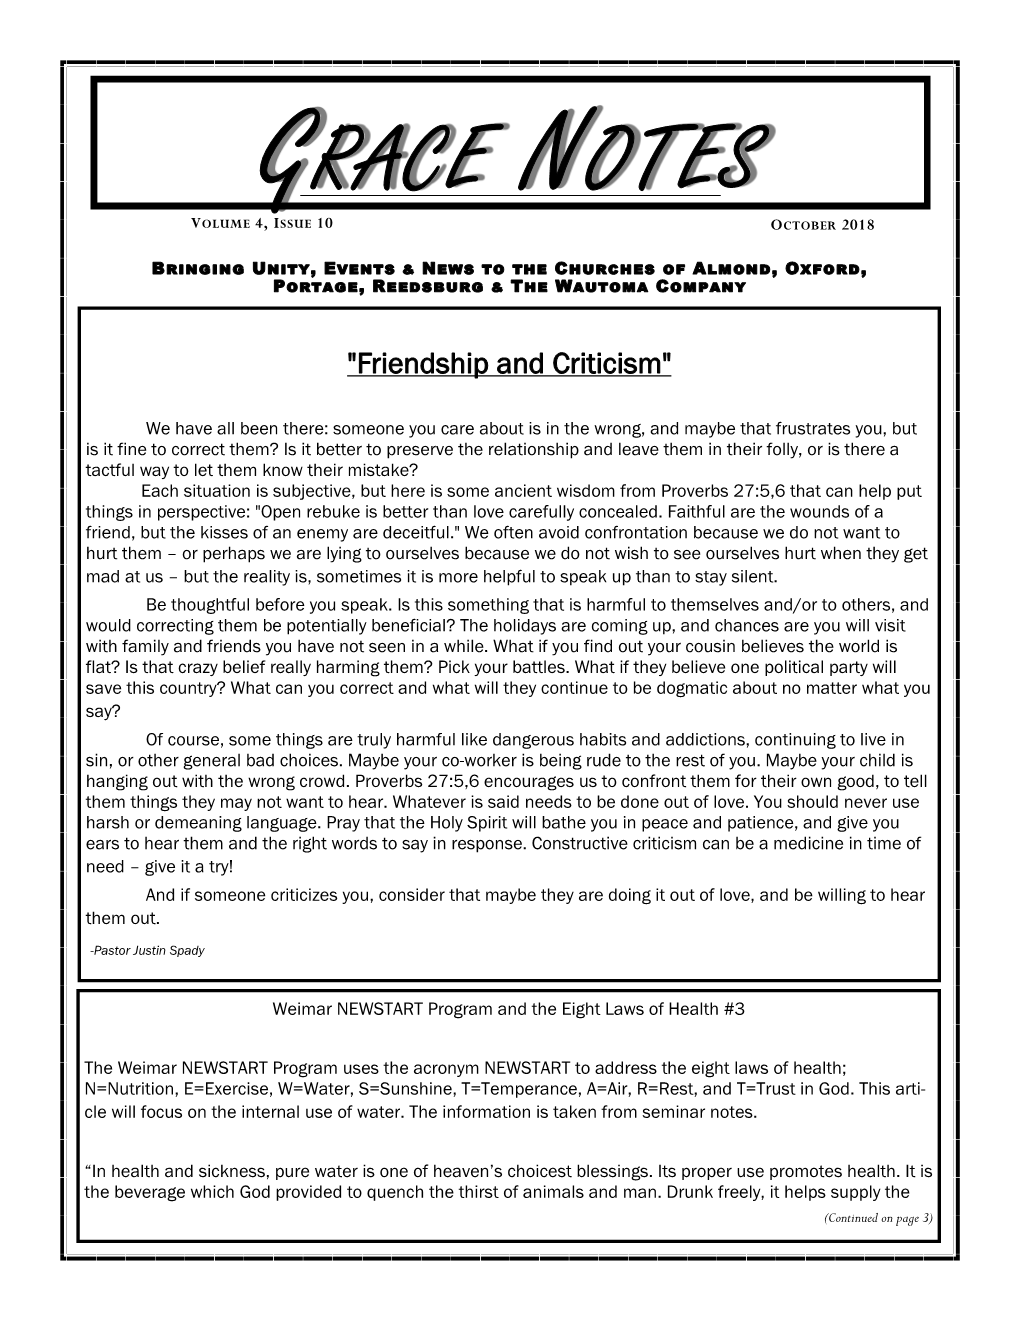 Grace Notes Volume 4, Issue 10 October 2018